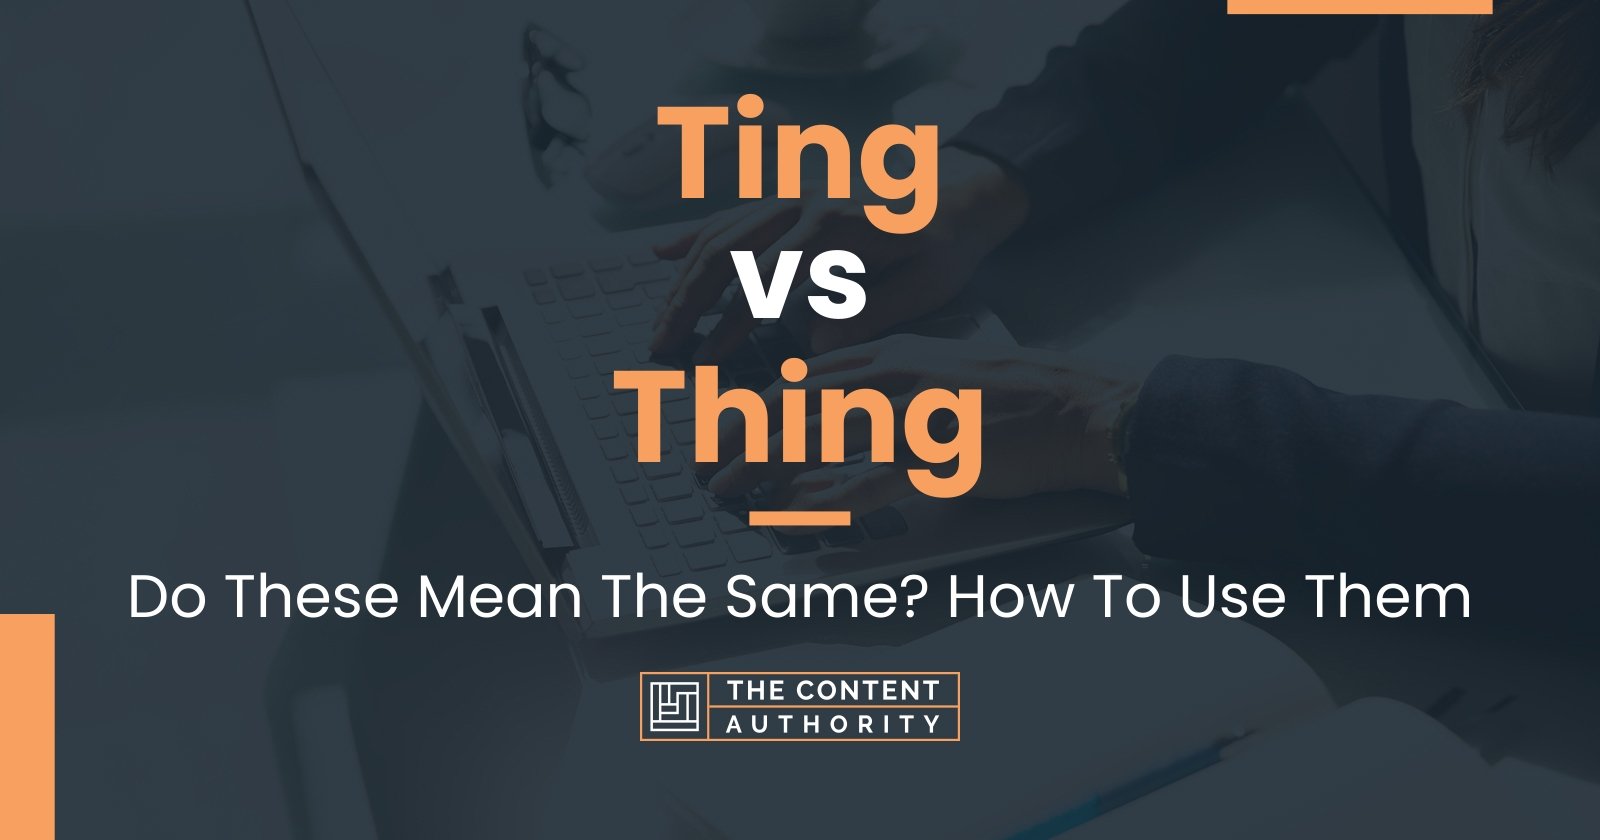 Ting vs Thing: Do These Mean The Same? How To Use Them